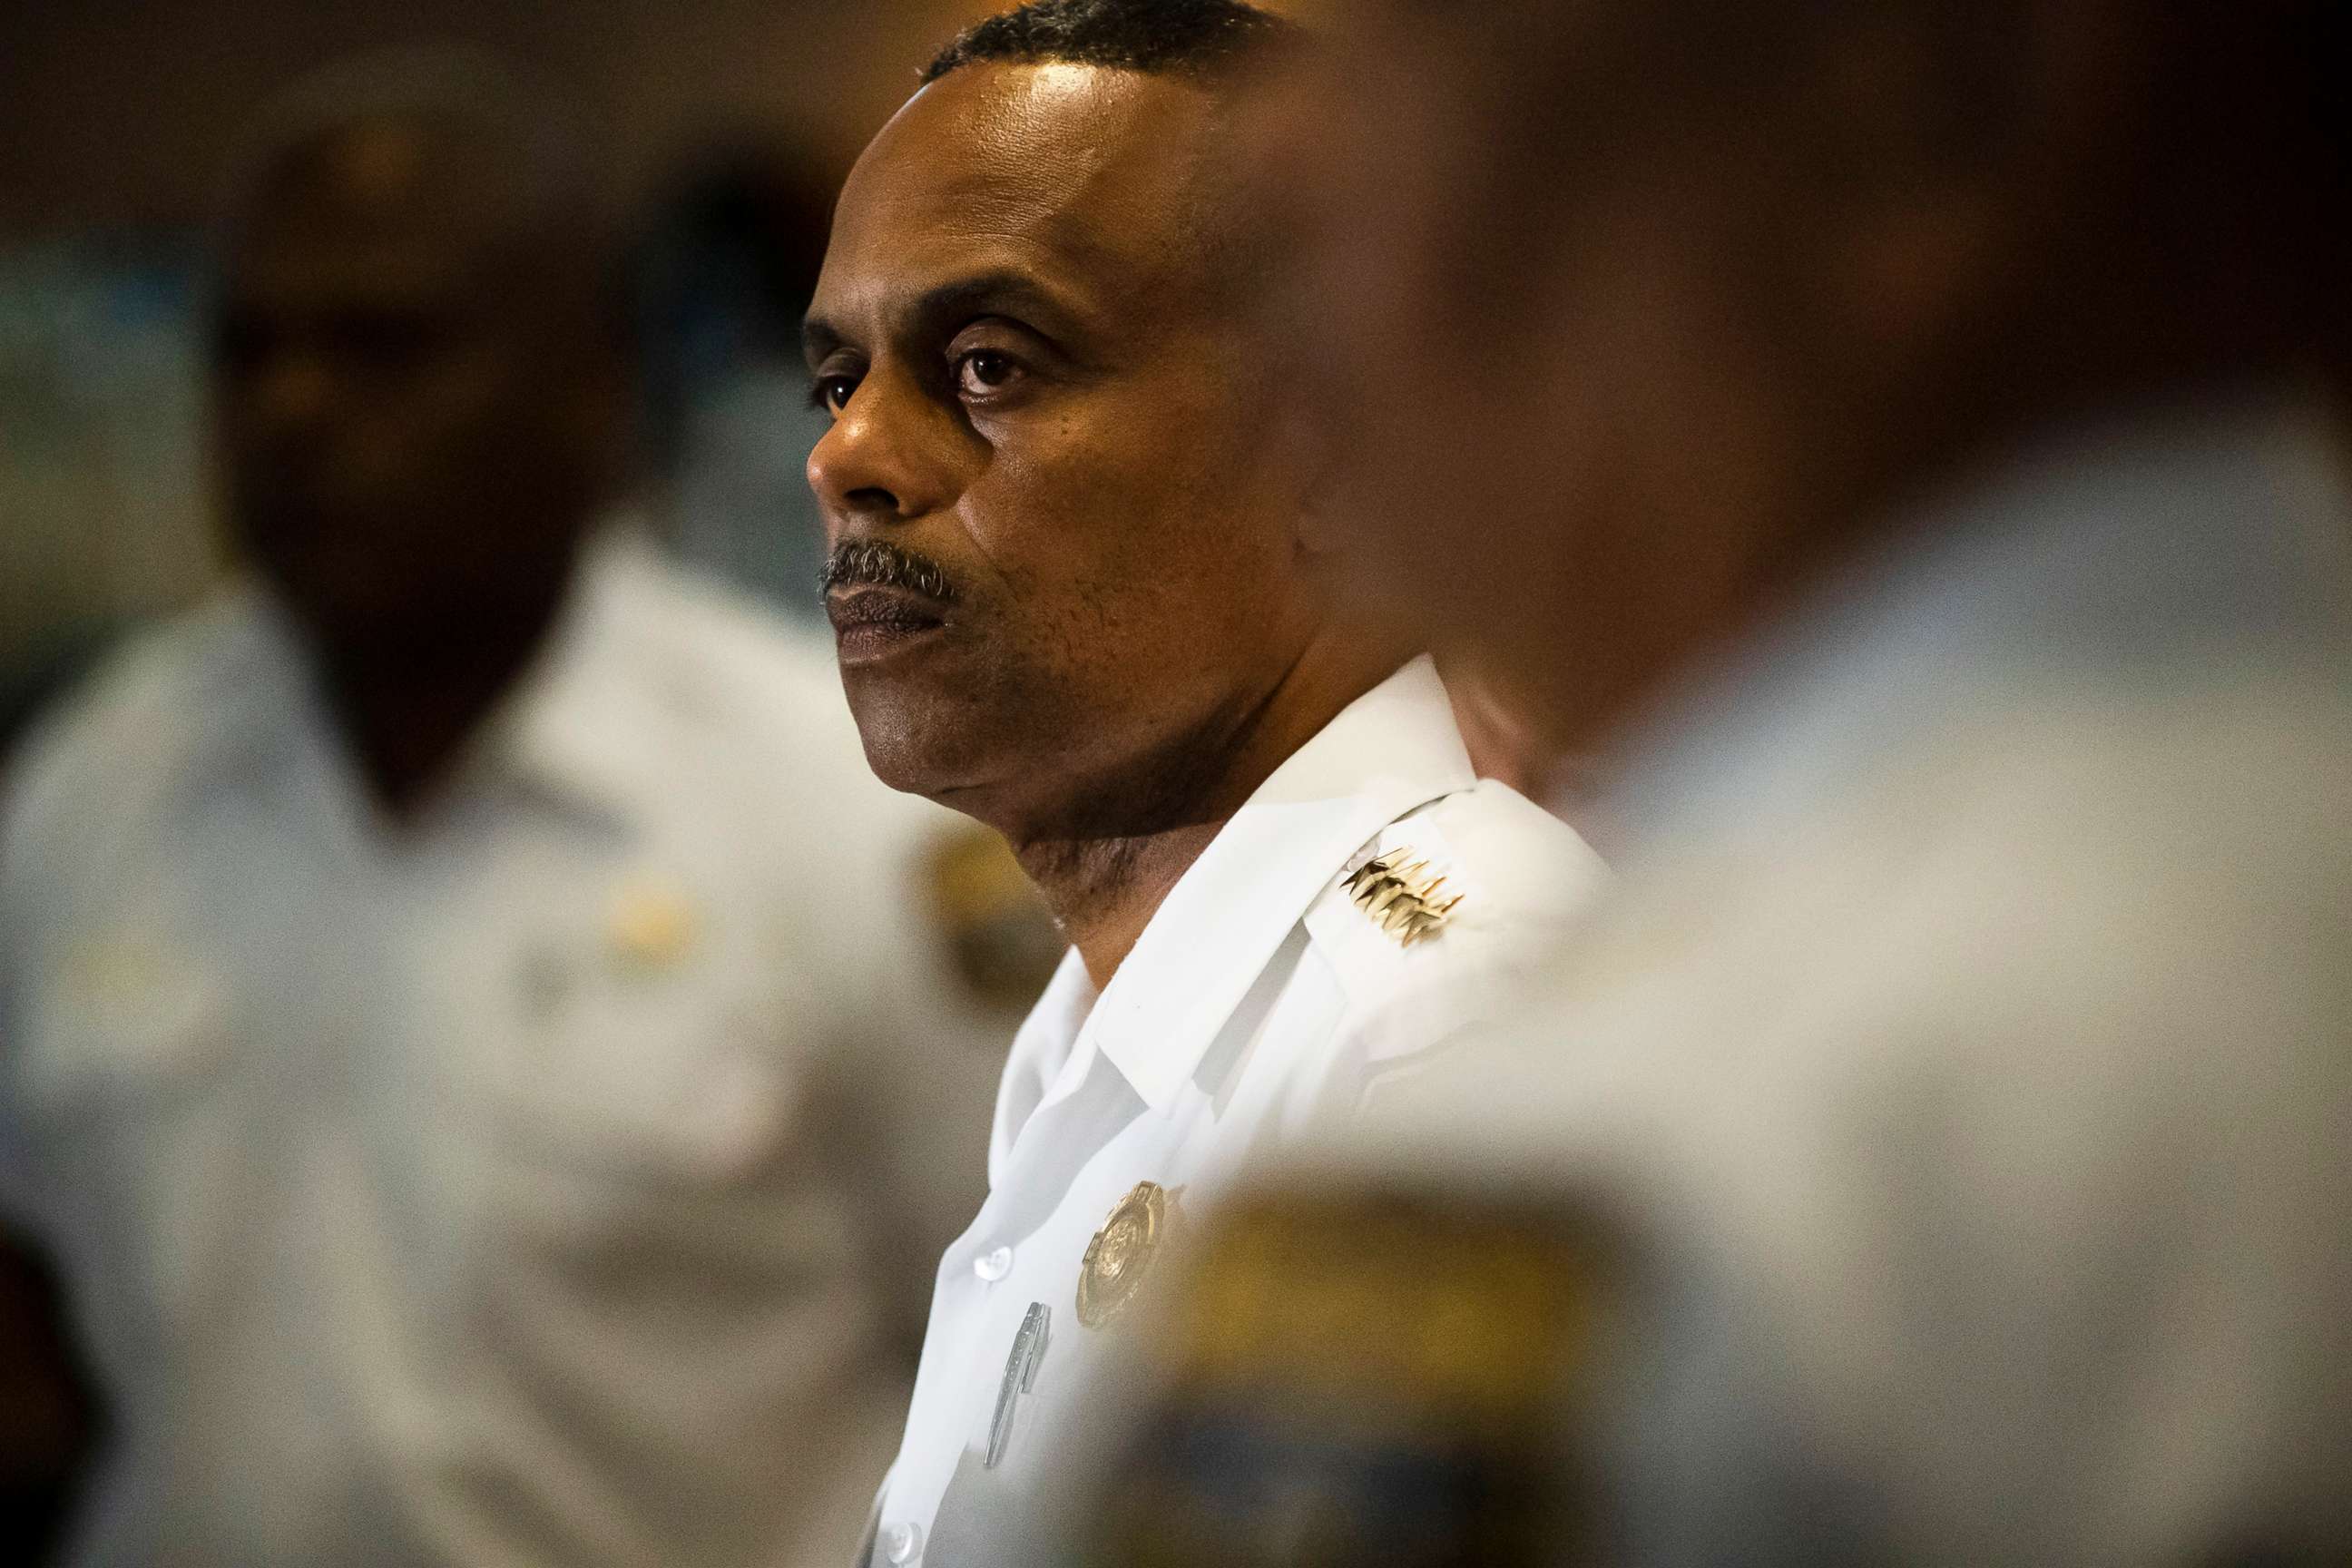 PHOTO: Philadelphia Police Commissioner Richard Ross listens to a question during a news conference in Philadelphia, June 19, 2019.